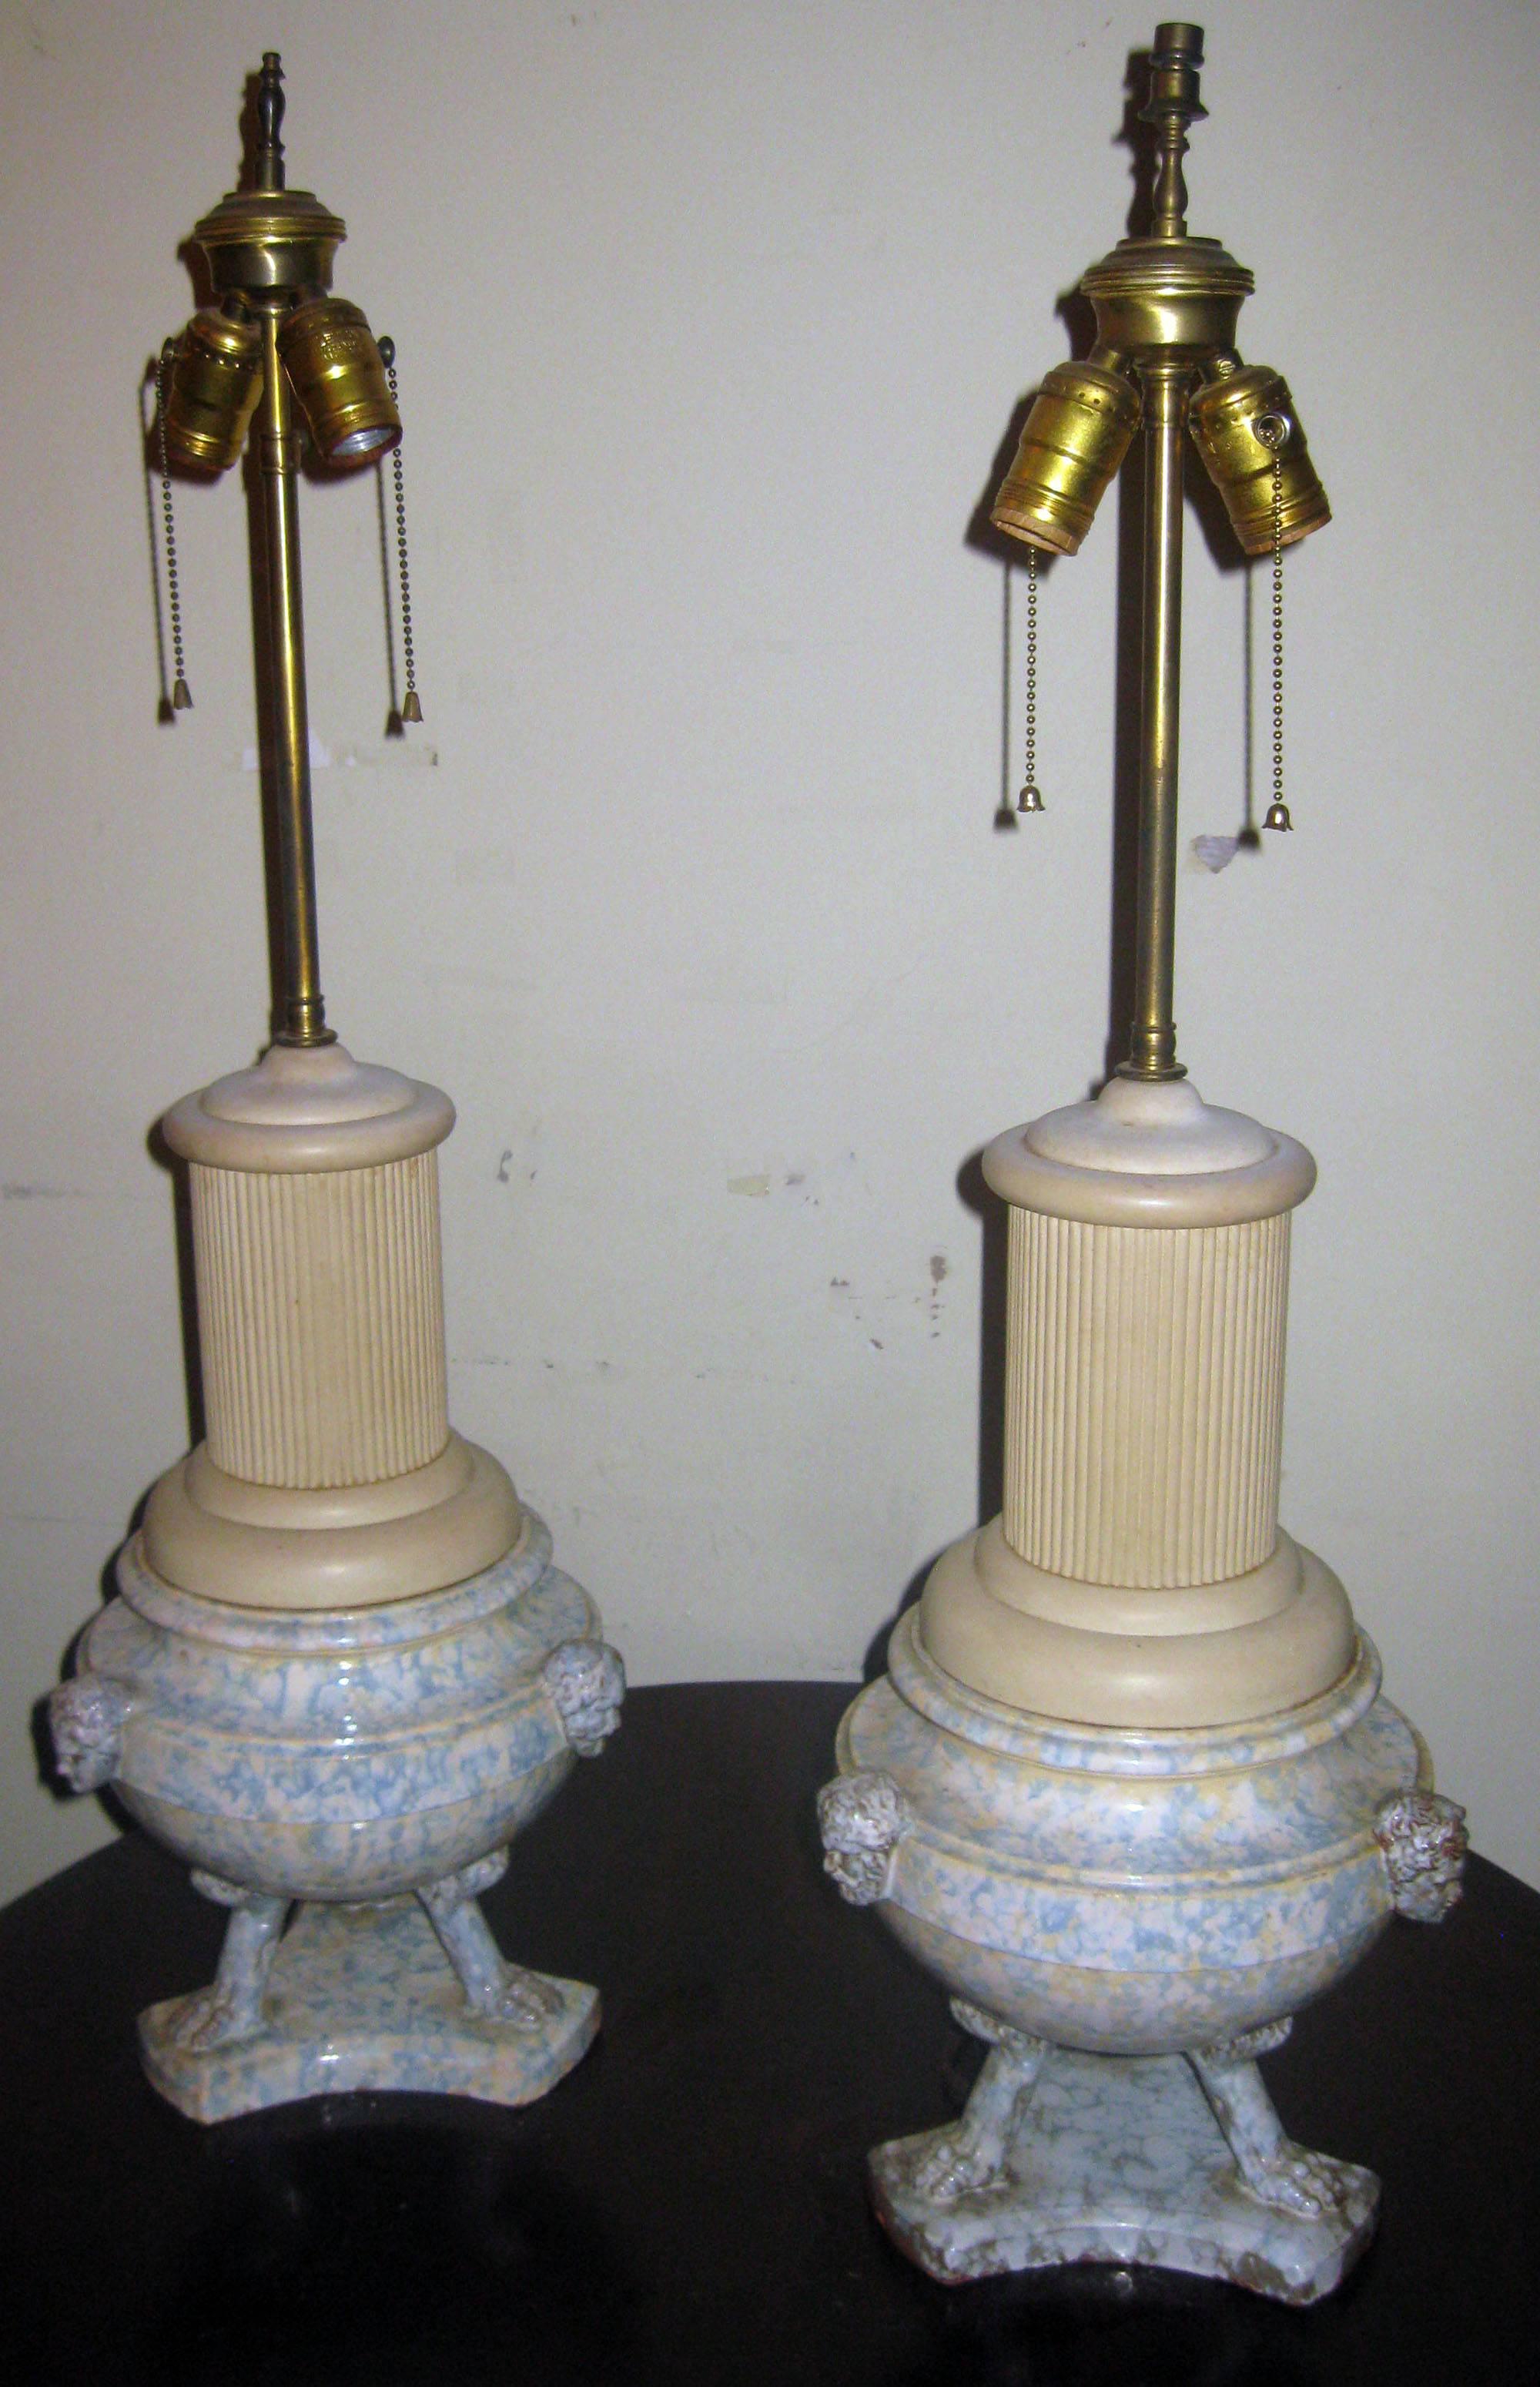 Pair of Italian blue and cream spongeware urns converted into table lamps with added earthenware columns. Features include tri animal feet bases and three different head figures at top of each urn. Double sockets. Urns themselves measure 9 .50